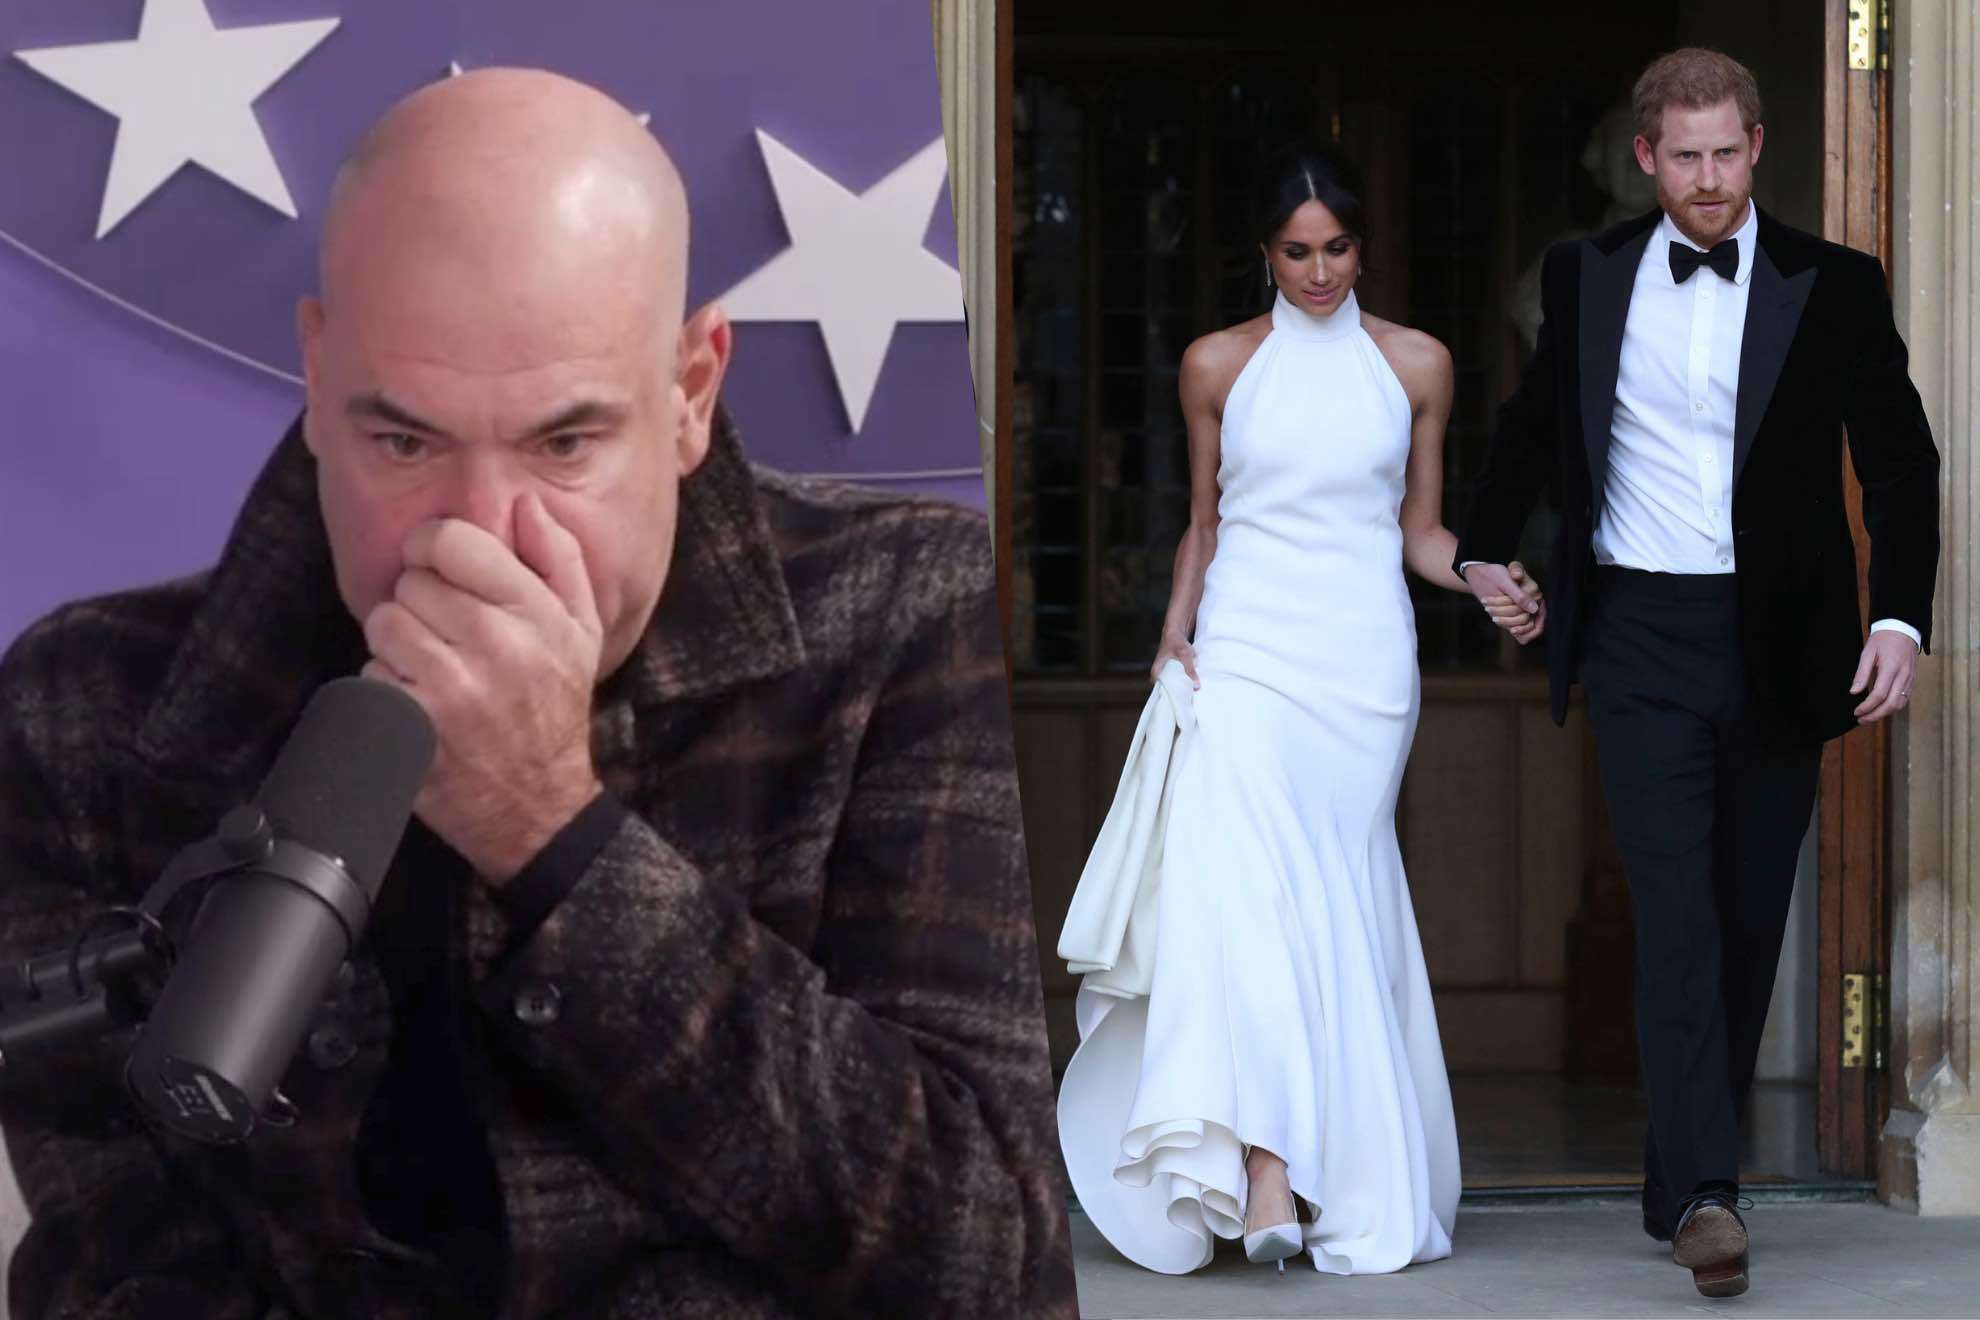 There was an awful smell at Harry and Meghans wedding, according to Rick Hoffman